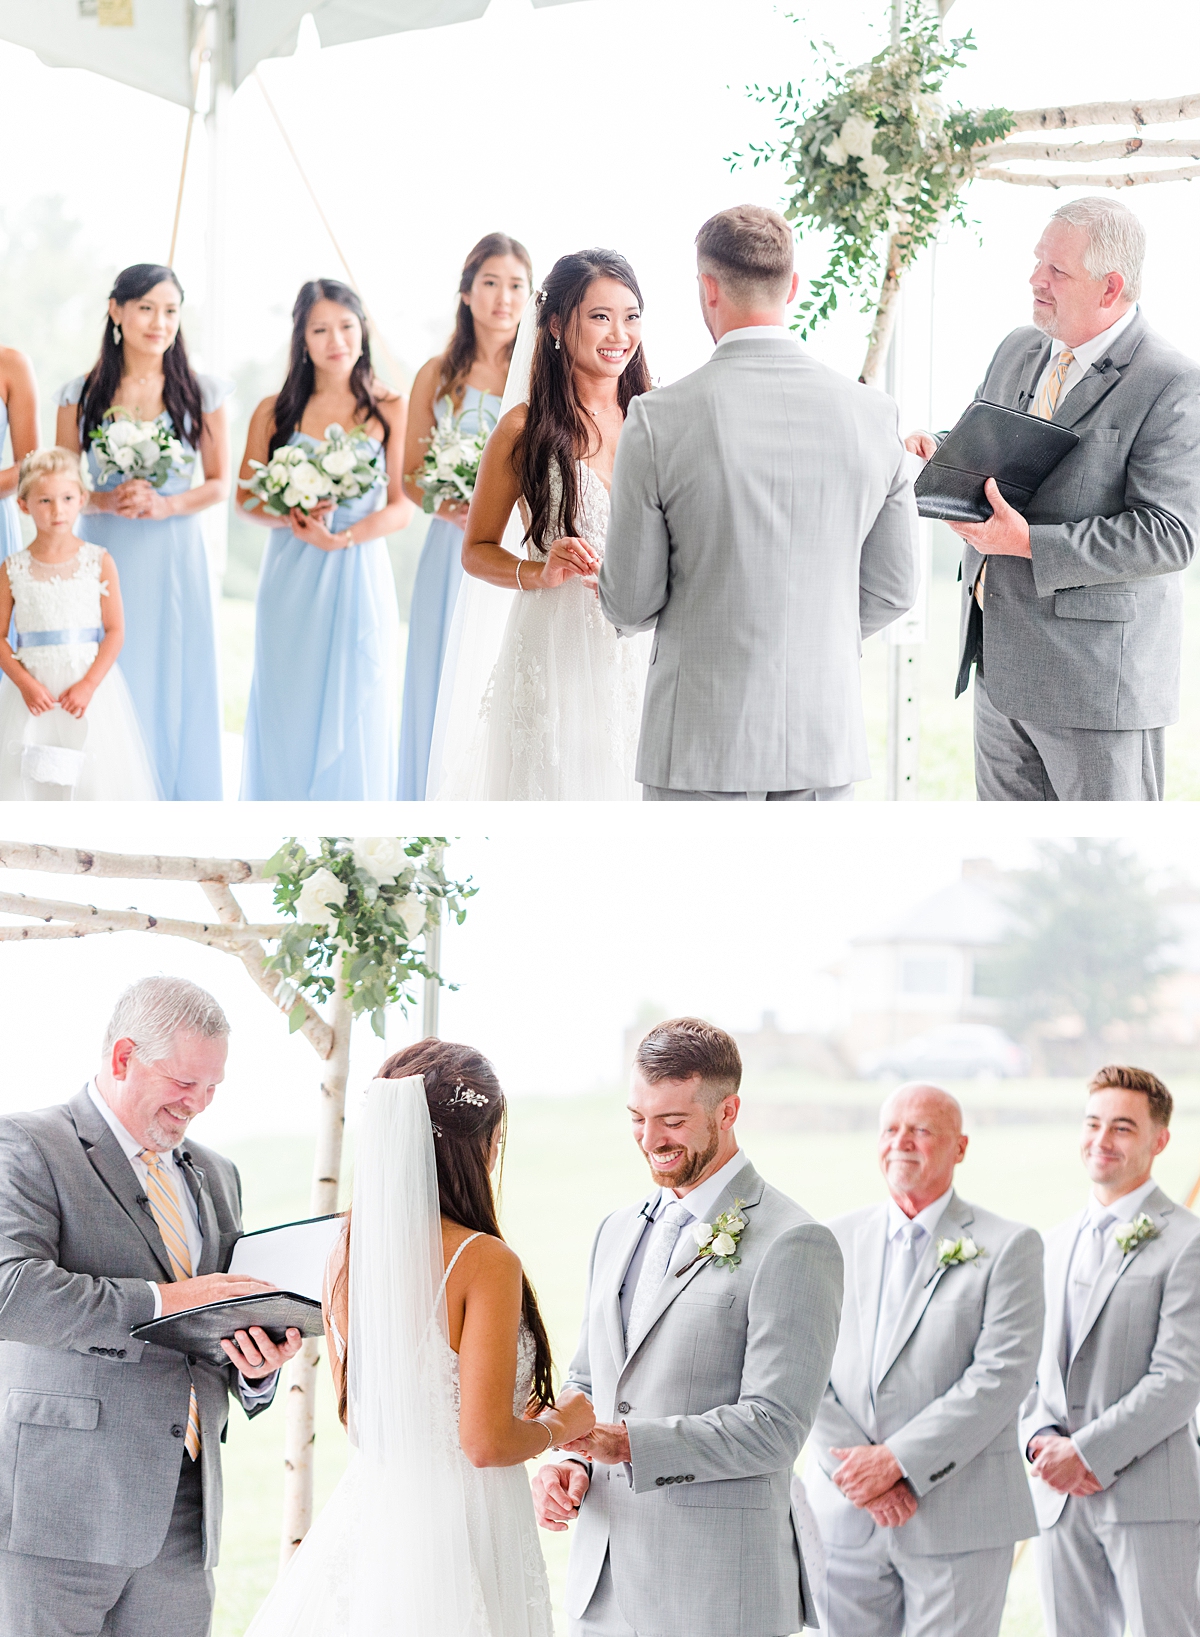 Exchanging Rings During Wedding Ceremony at Grace Estate Winery Summer Wedding. Wedding Photography by Richmond Wedding Photographer Kailey Brianne Photography. 